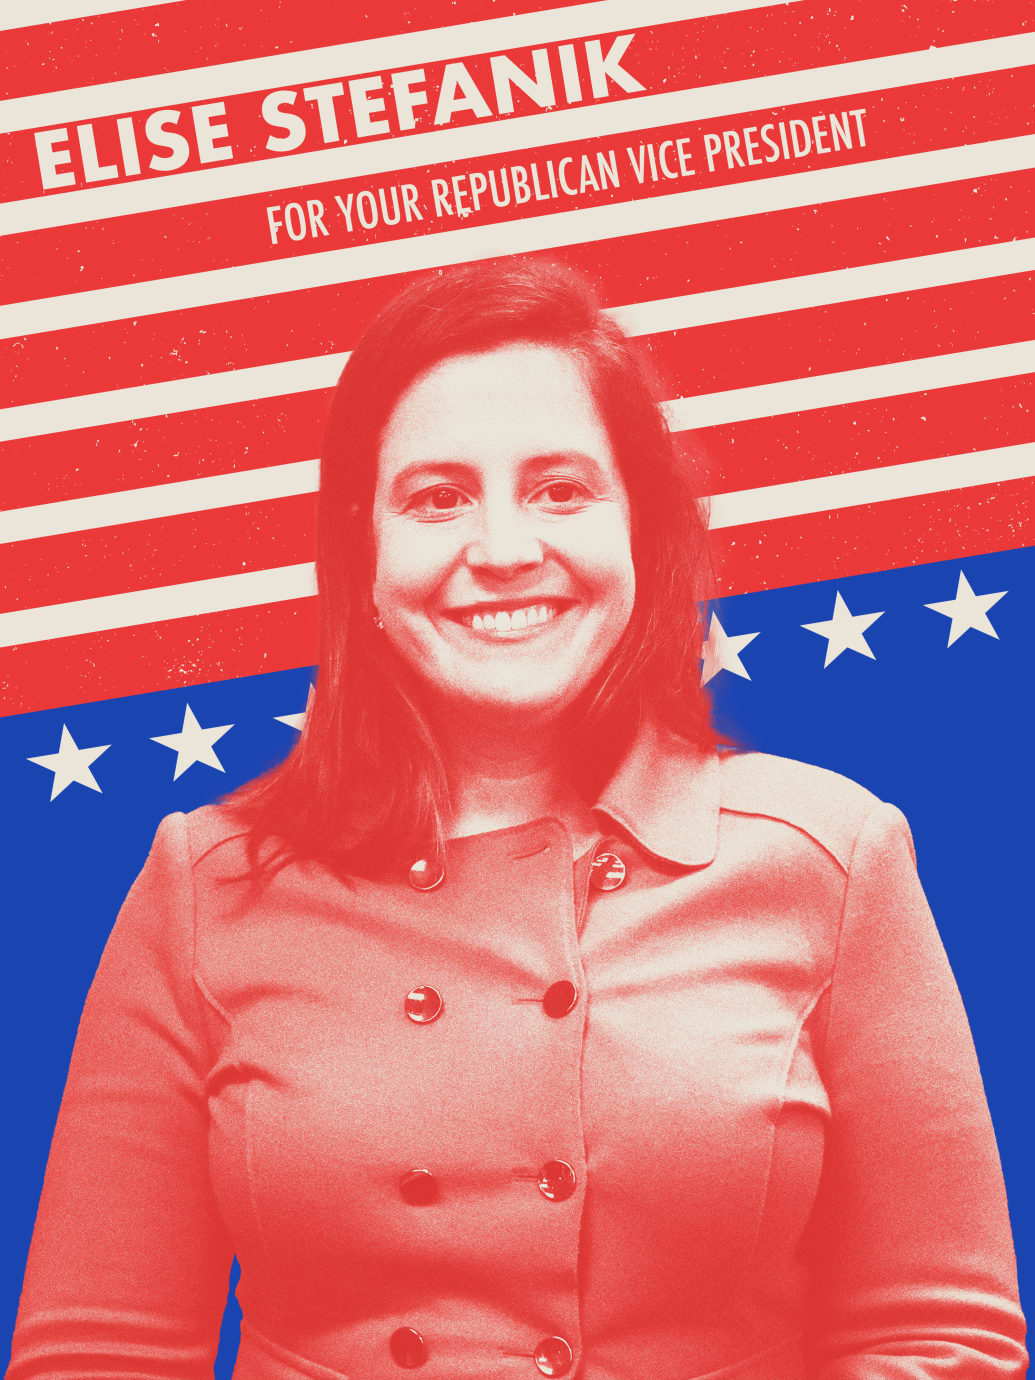 Vice Presidential campaign poster featuring Elise Stefanik